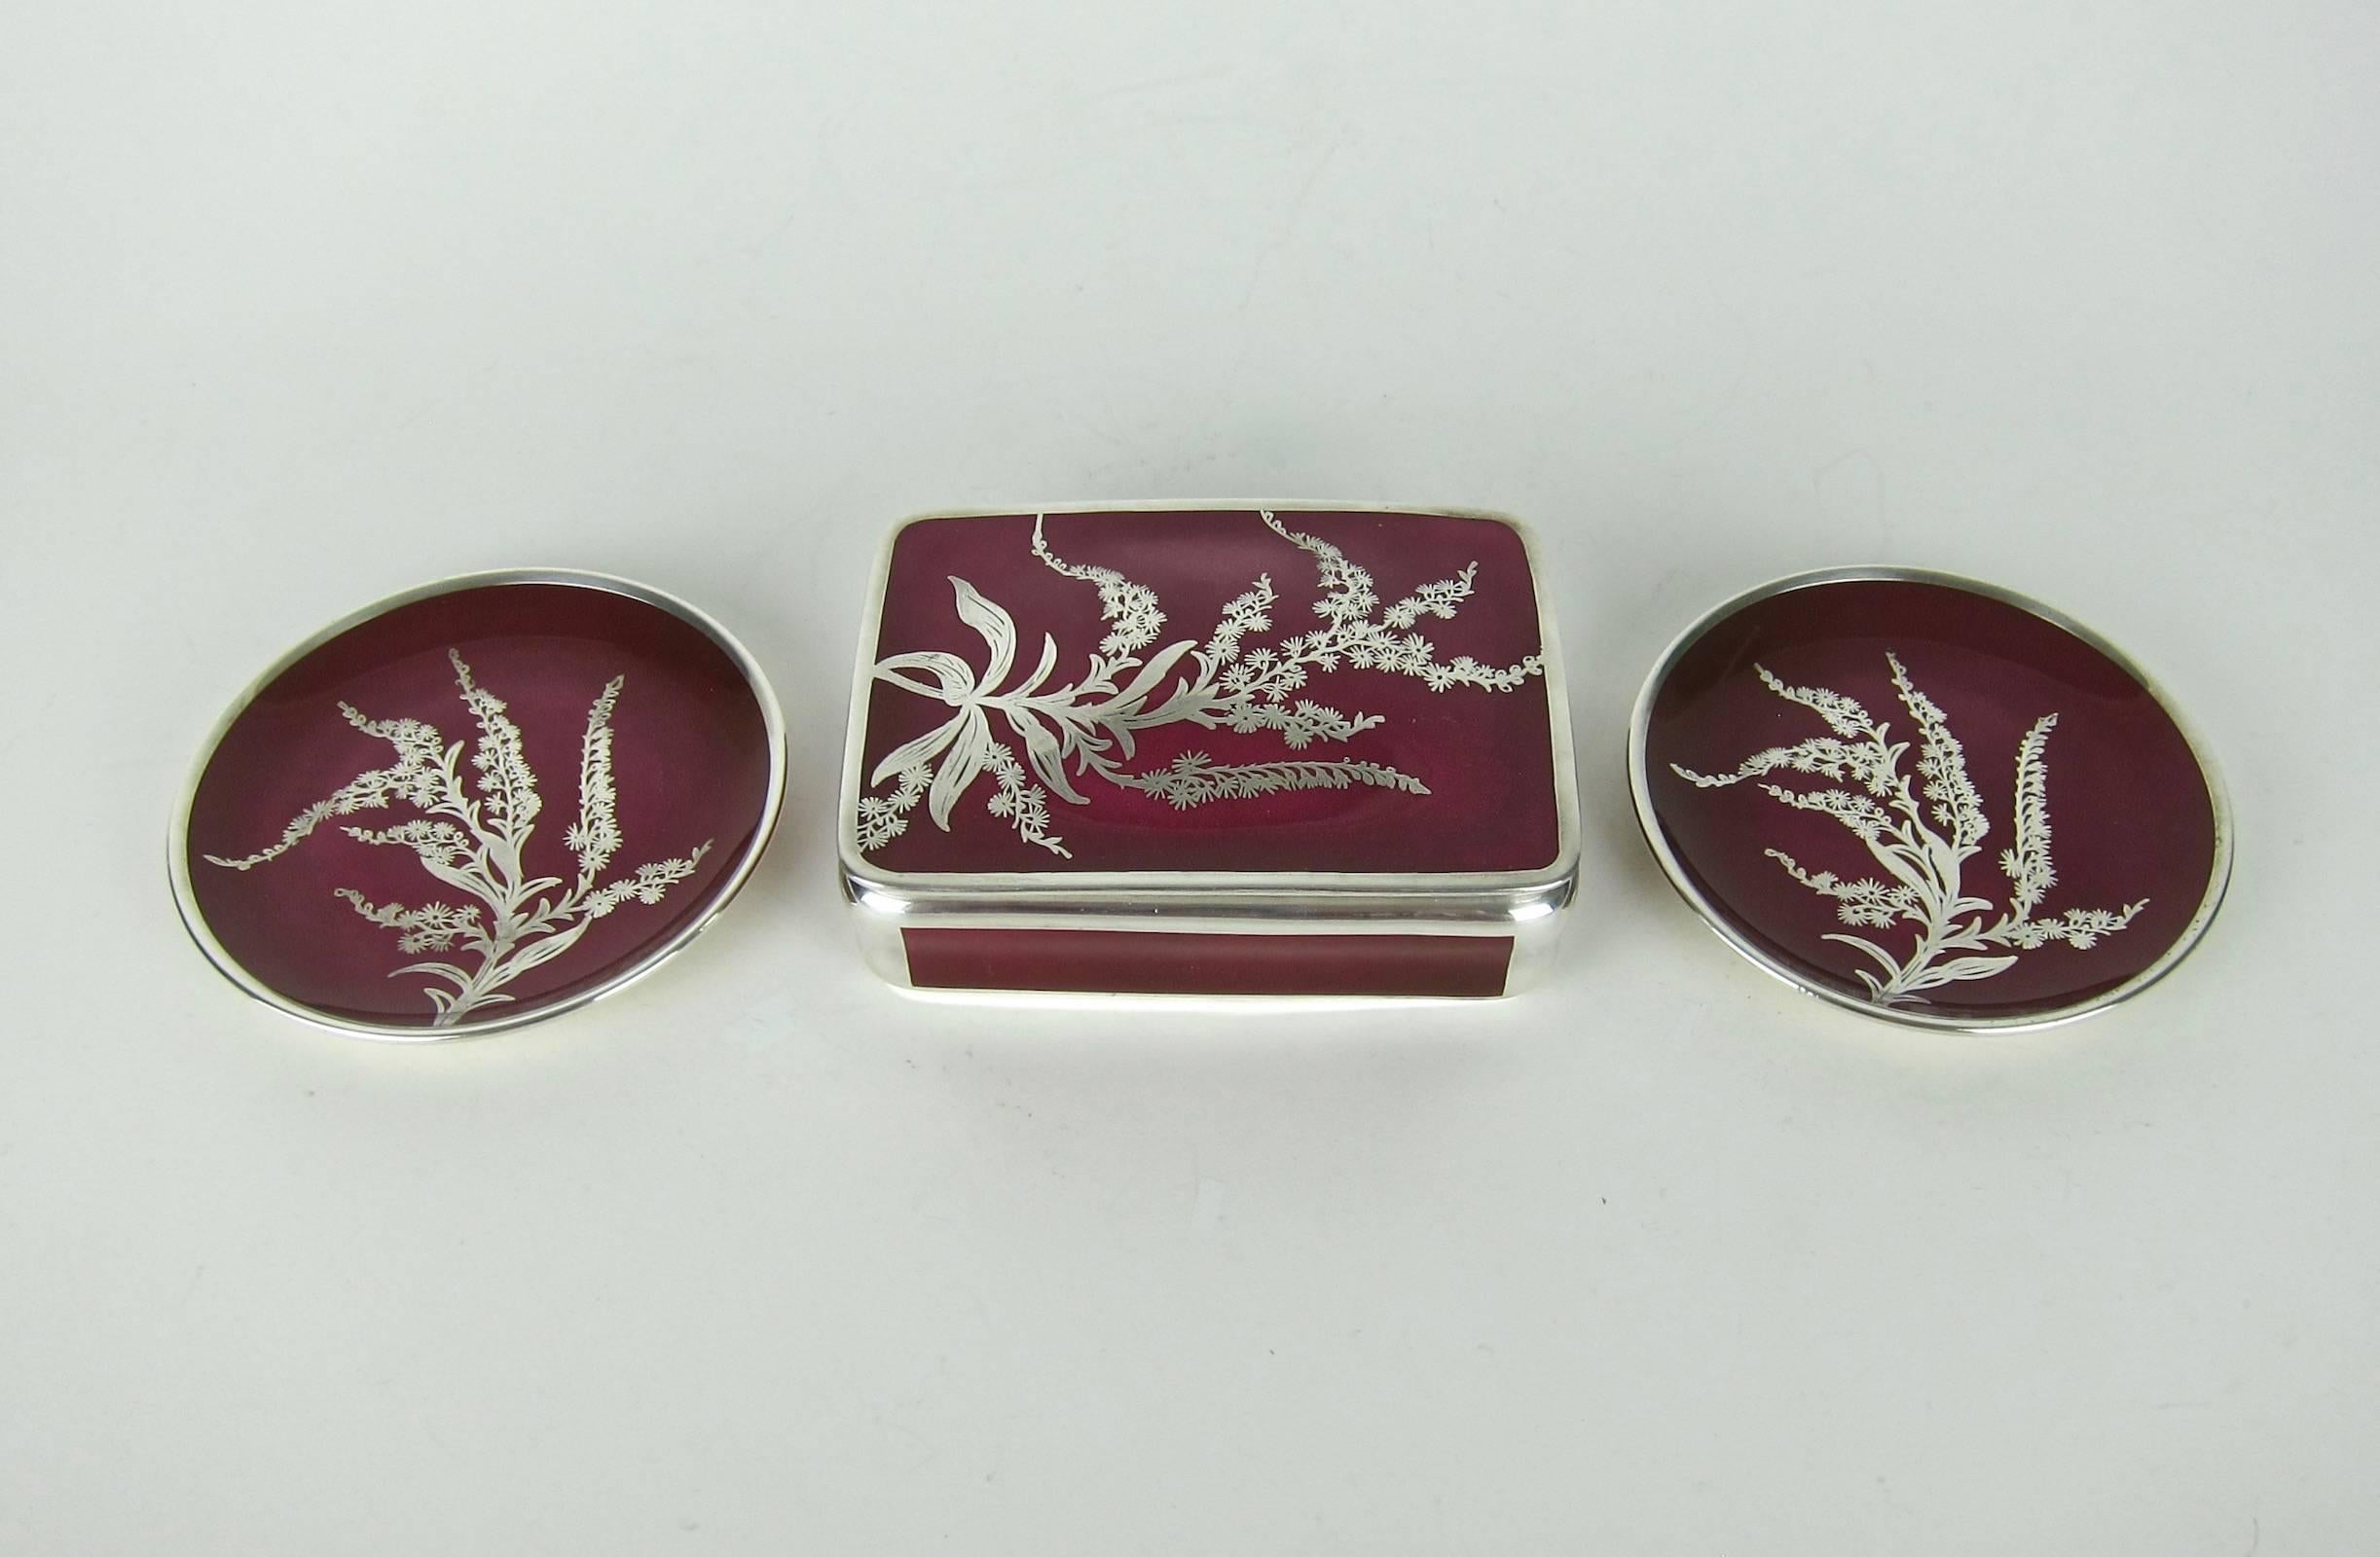 An exquisite vintage smoking or vanity set with an intricate botanical theme in the Art Nouveau style by Manfred Veyhl of Germany, active 1928-1950s. Each piece is in very good condition and inscribed 1000/1000 signifying a pure silver overlay